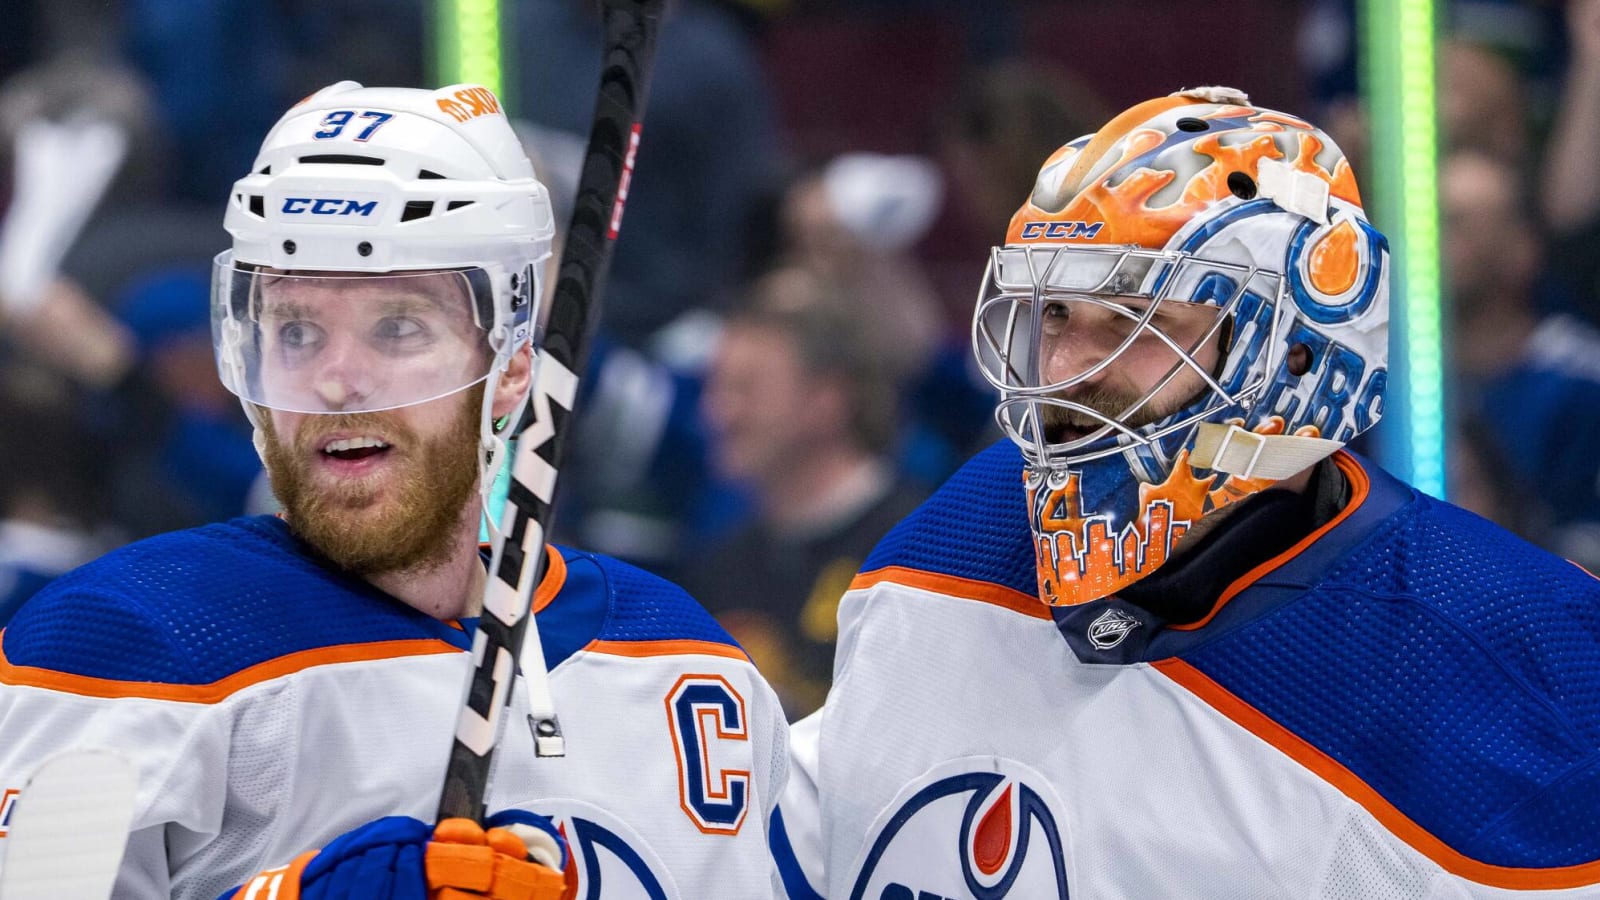 Oilers’ hot start powers them to 3-2 win in Game 7, punches their ticket to Dallas